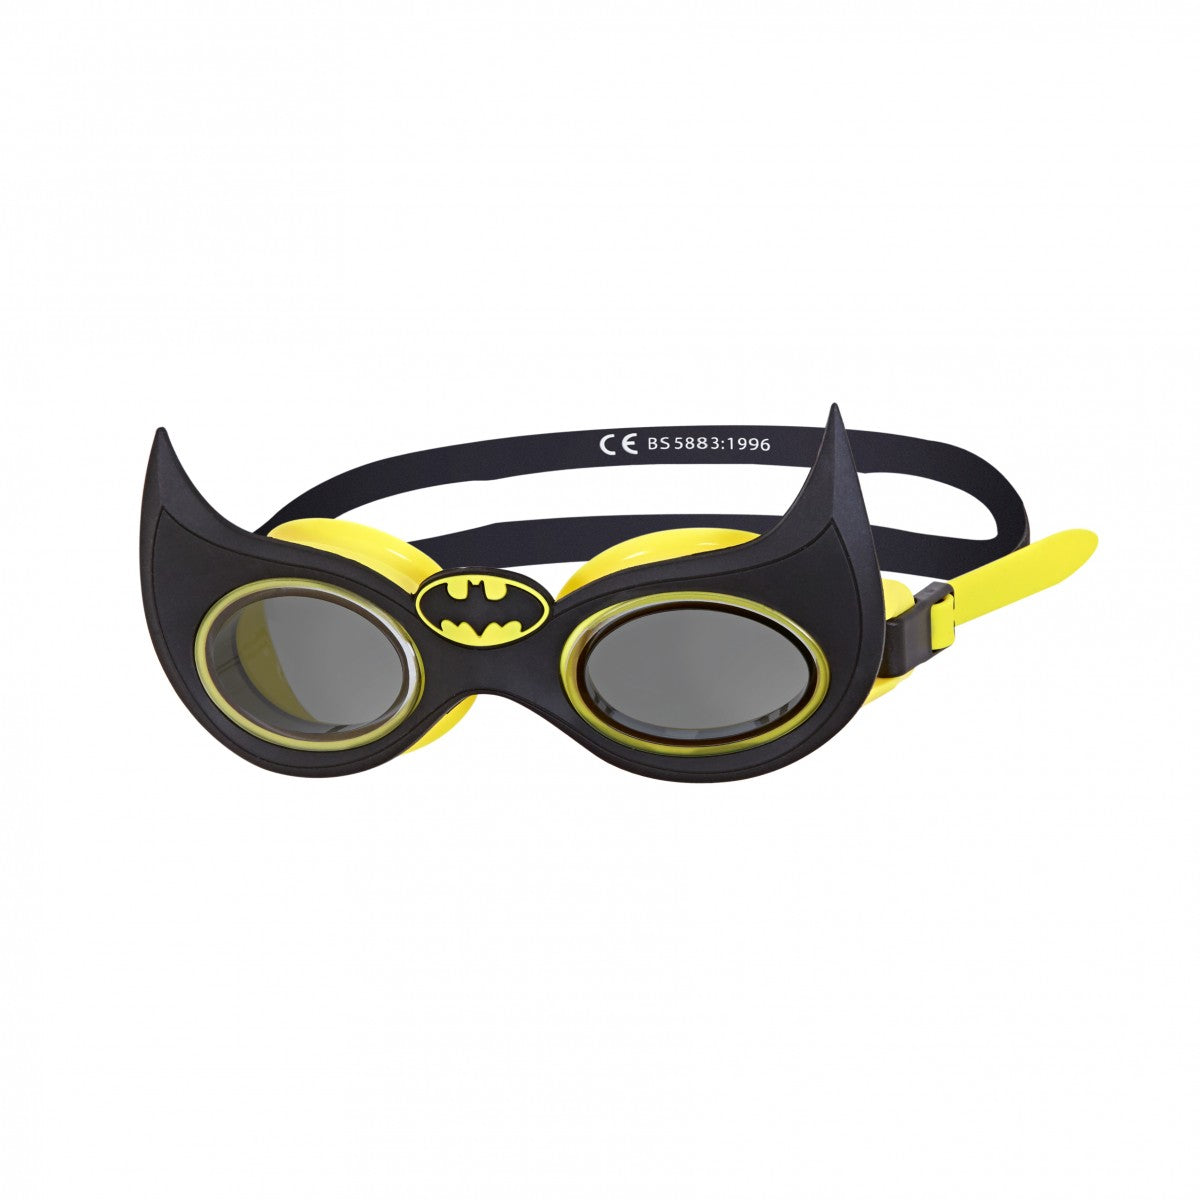 Zoggs Batman Character Swimming Goggles Aged 6 - 14 Years